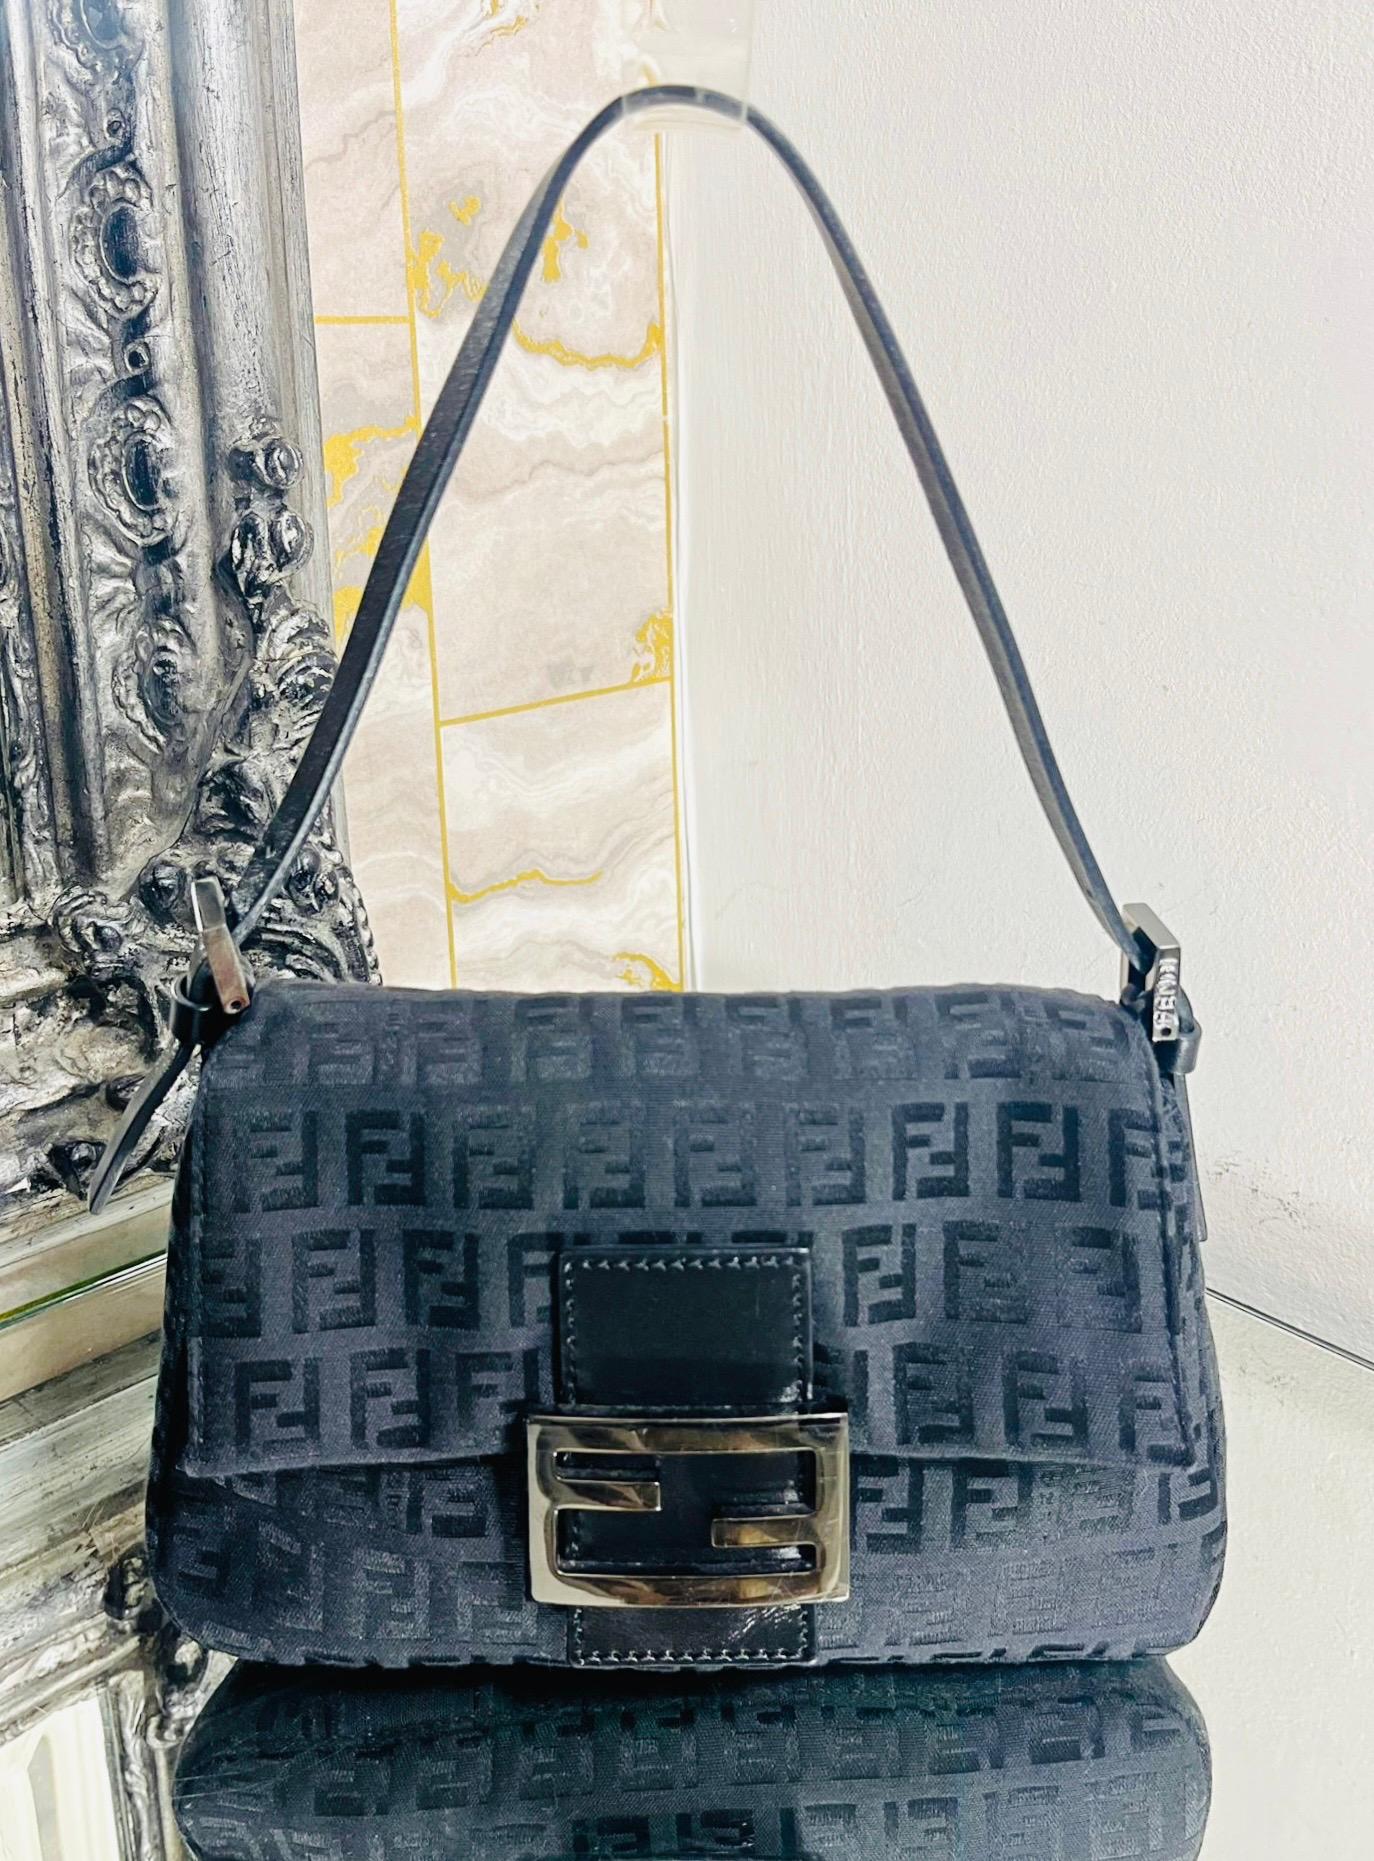 Fendi 'FF' Zucca Baguette Bag

Dark grey canvas handbag designed with signature Zucca print throughout.

Featuring silver, oversized 'FF' logo flap closure on black leather strap.

Detailed with adjustable shoulder strap with 'Fendi' logo engraved